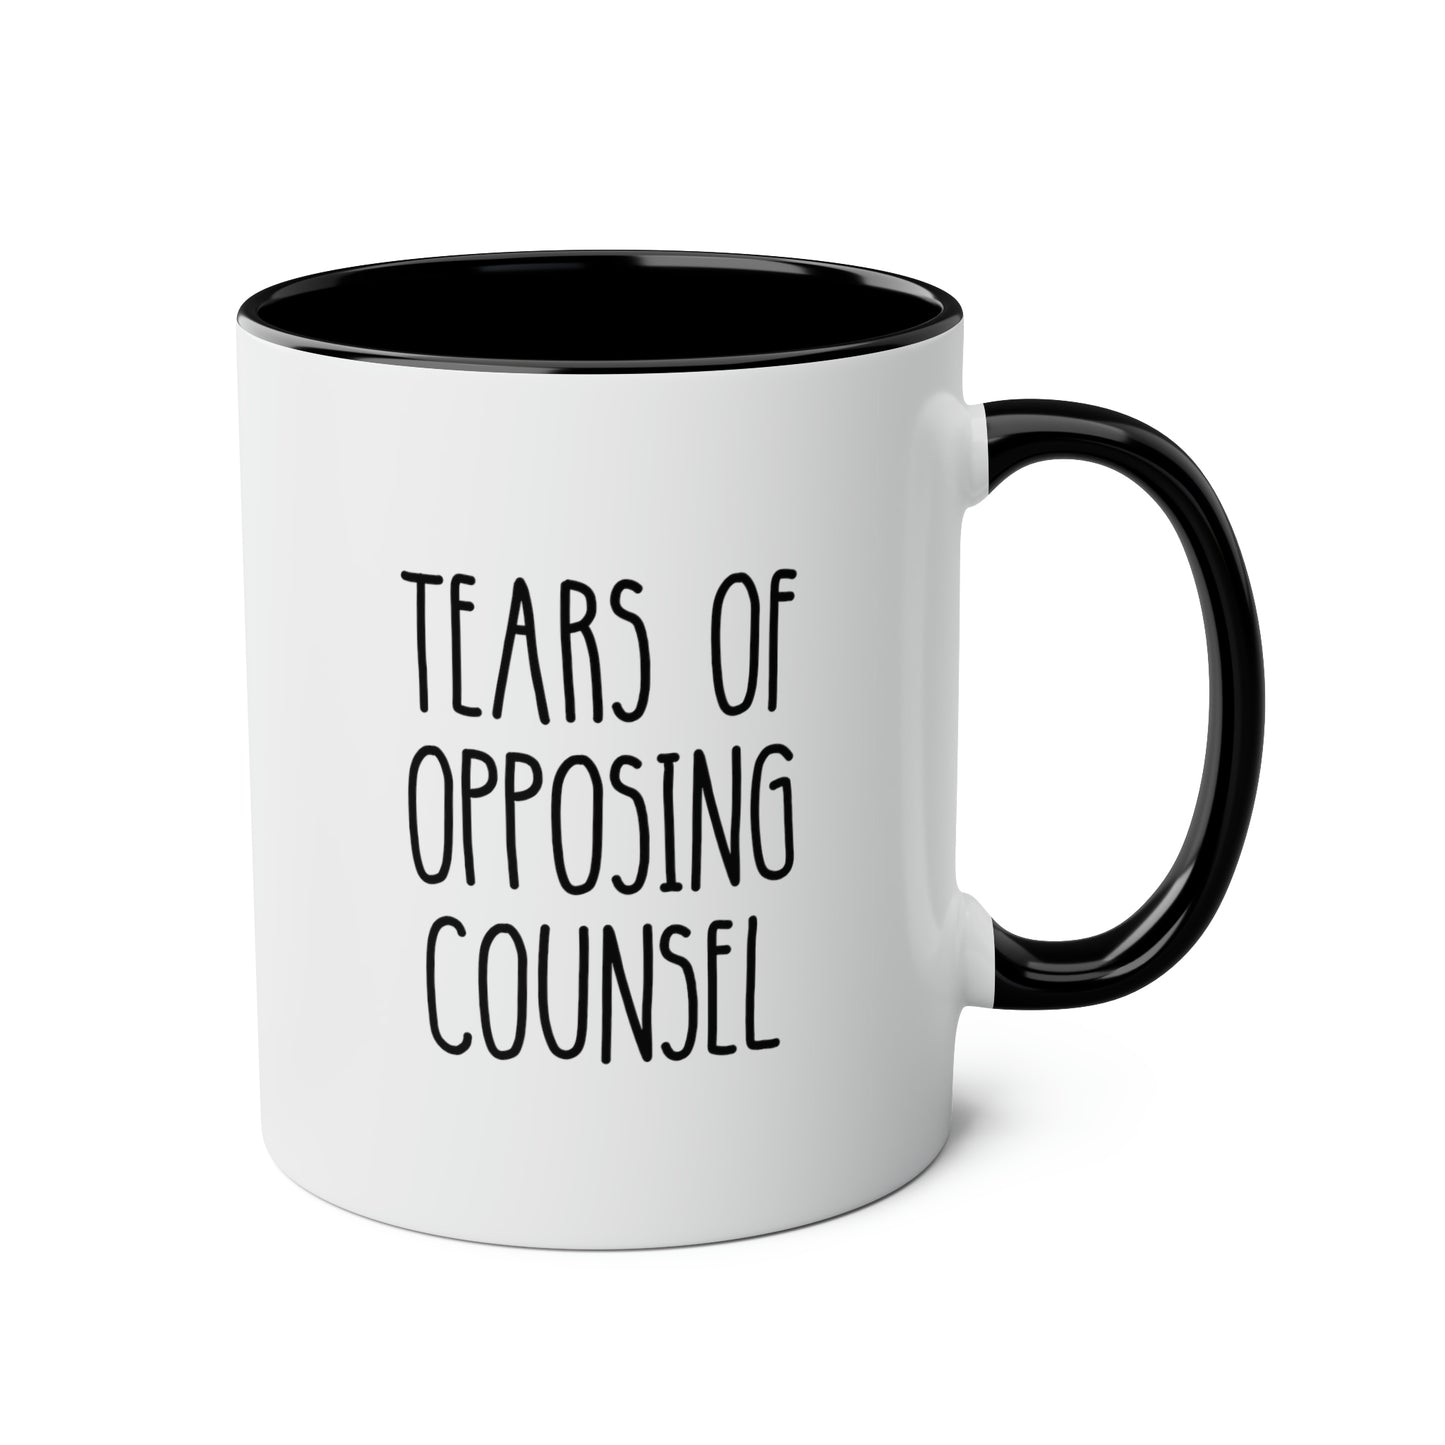 Tears Of Opposing Counsel 11oz white with black accent funny large coffee mug gift for lawyer law student graduation solicitor attorney prosecutor waveywares wavey wares wavywares wavy wares